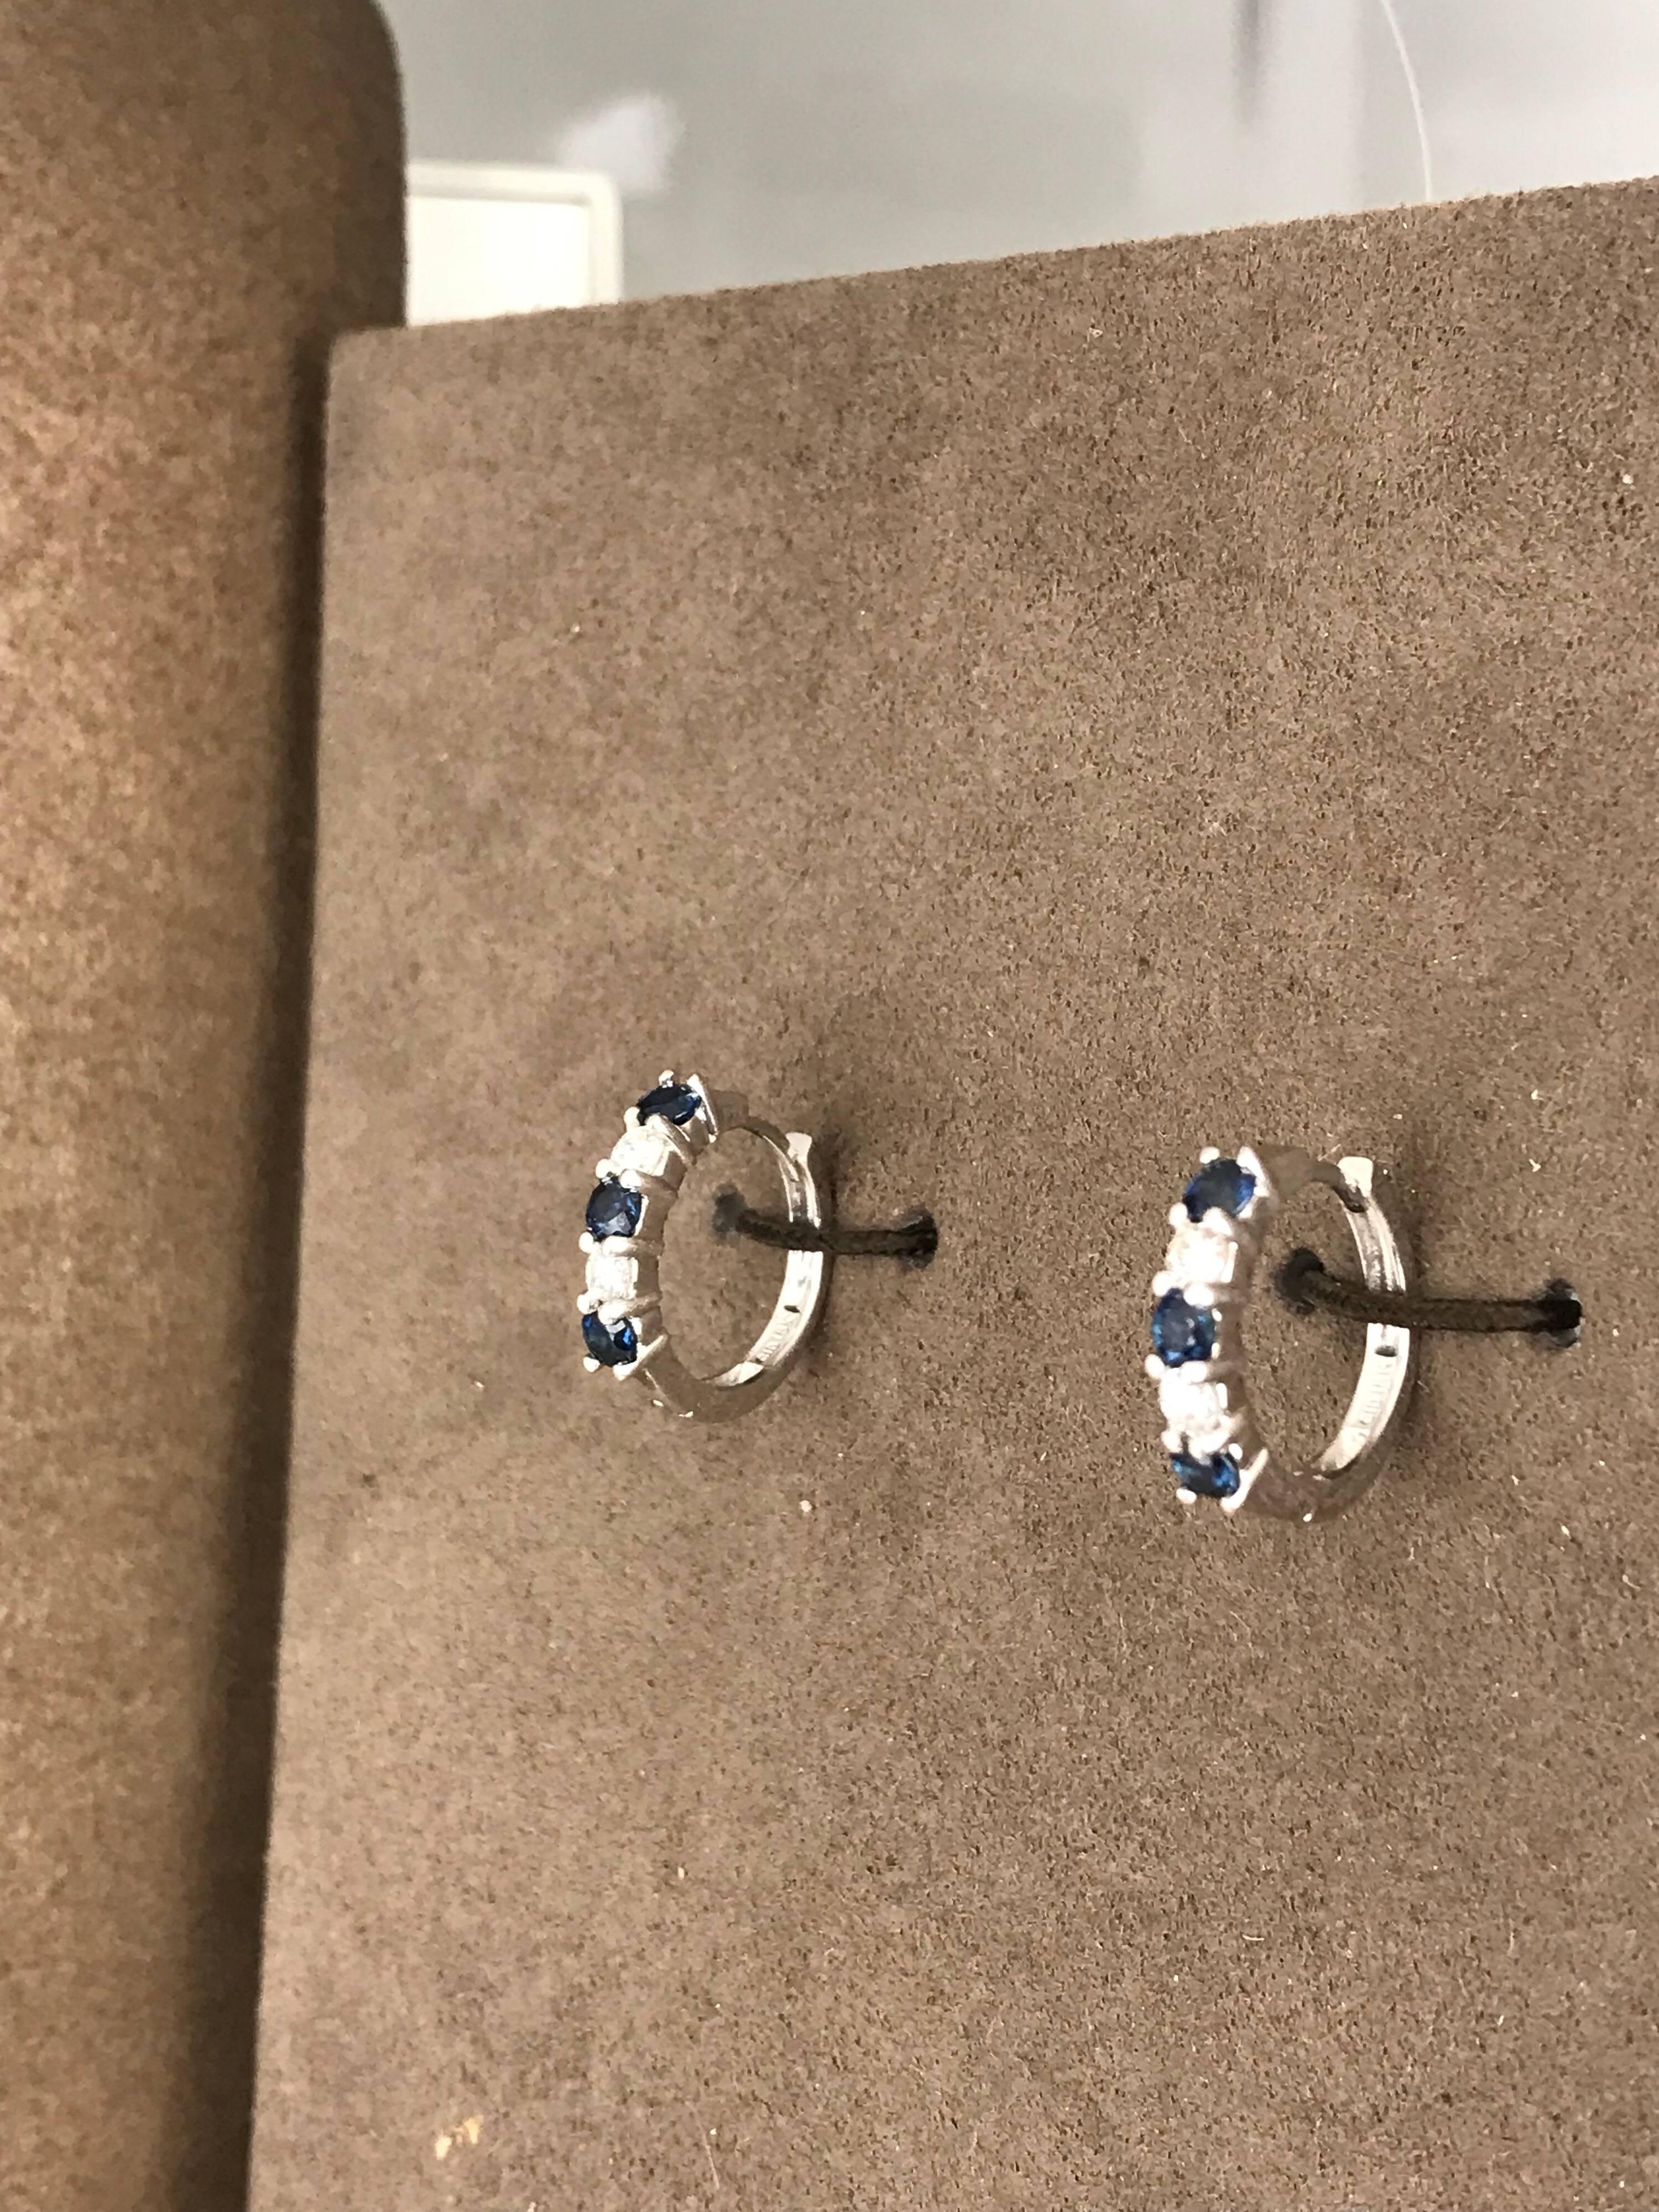 Contemporary, earrings with alternating Sapphires and Diamonds set in a huggie style setting. The metal is 18 karat white gold.
The (4) diamonds  measuring 2.7 millimeters have a total weight of approximately .28 carat. Quality of the diamonds are